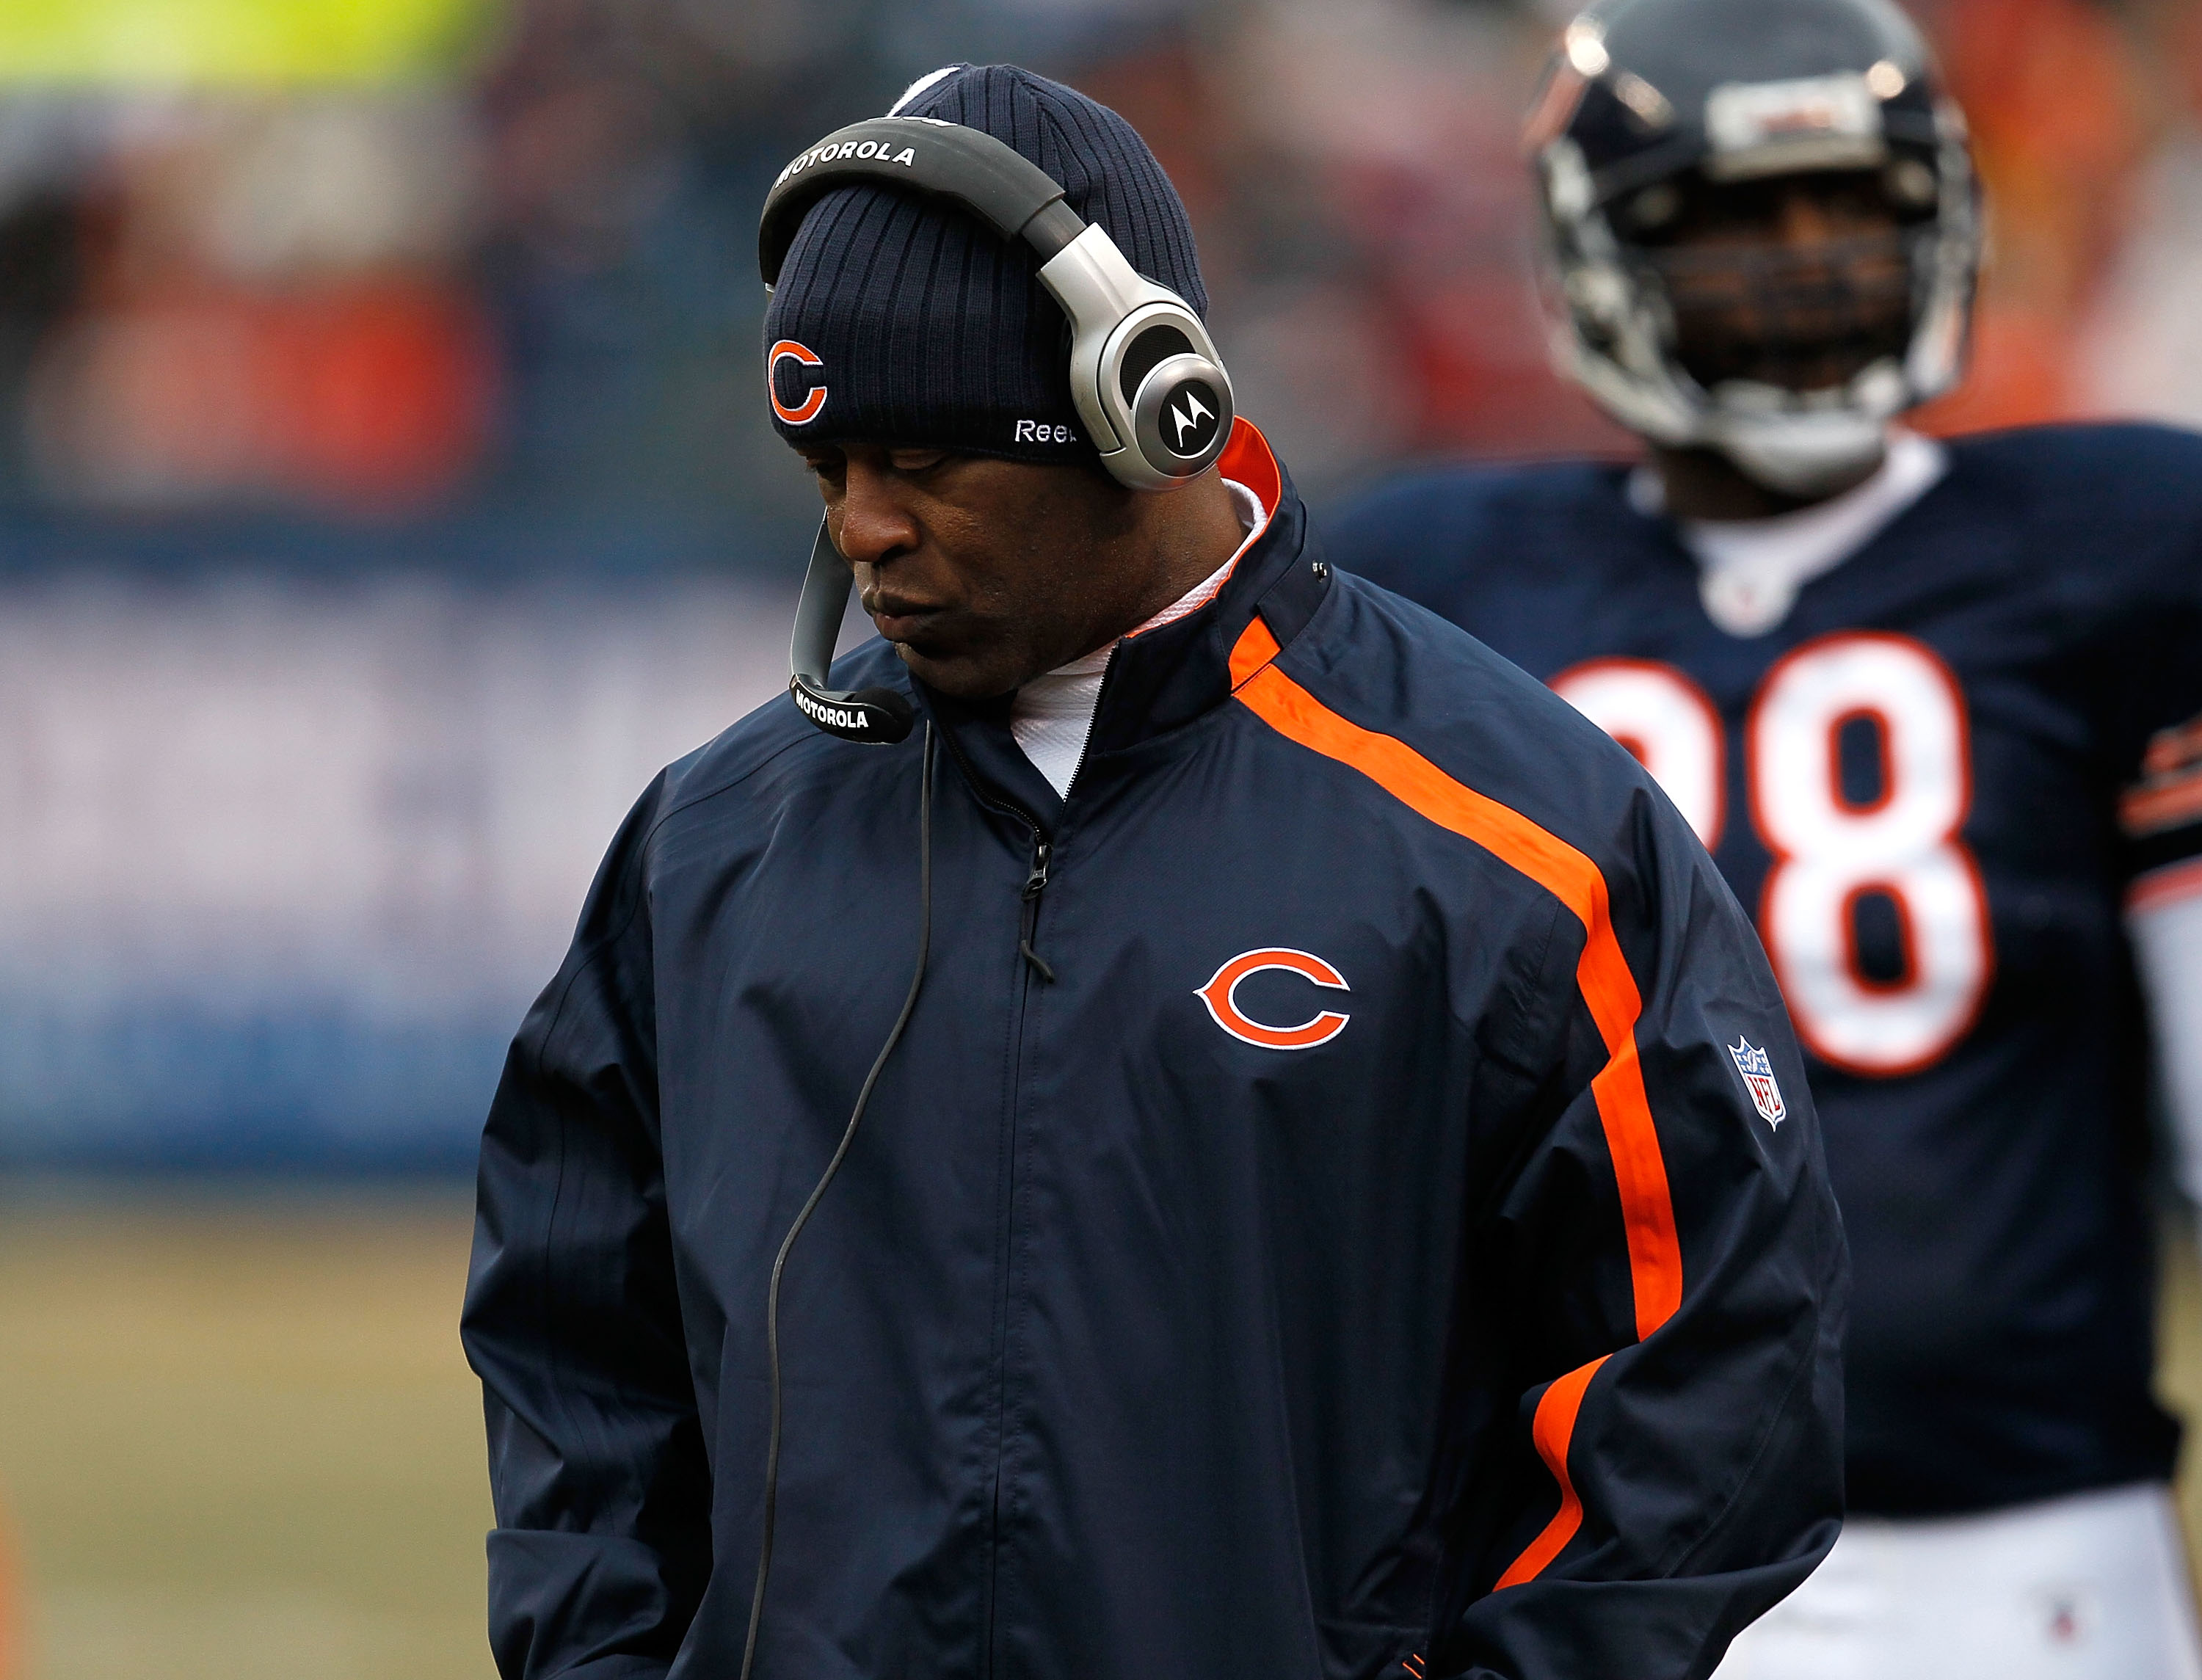 CHICAGO - DECEMBER 13: Head coach Lovie Smith of the Chicago Bears waits for a challenge call during a game against the Green Bay Packers at Soldier Field on December 13, 2009 in Chicago, Illinois. The Packers defeated the Bears 21-14. (Photo by Jonathan